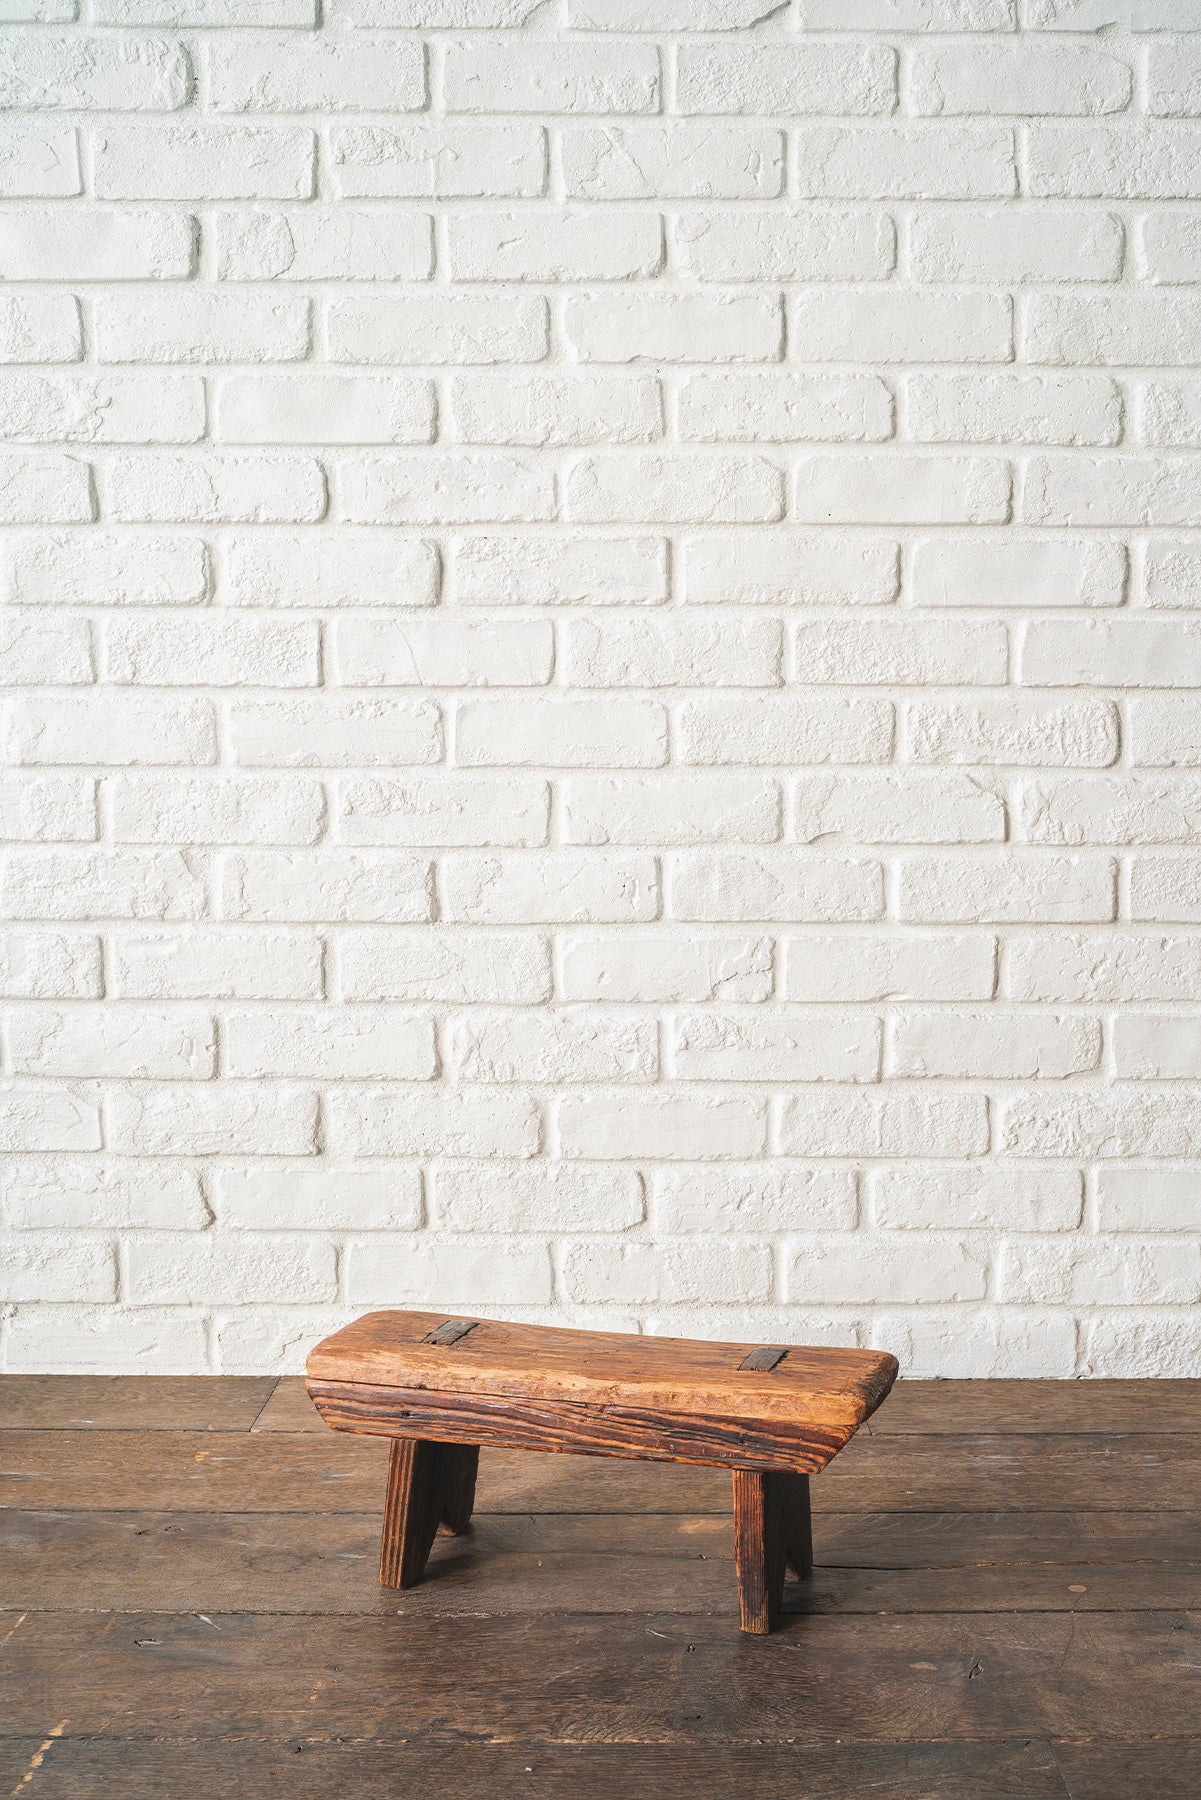 EARLY PRIMITIVE STOOL